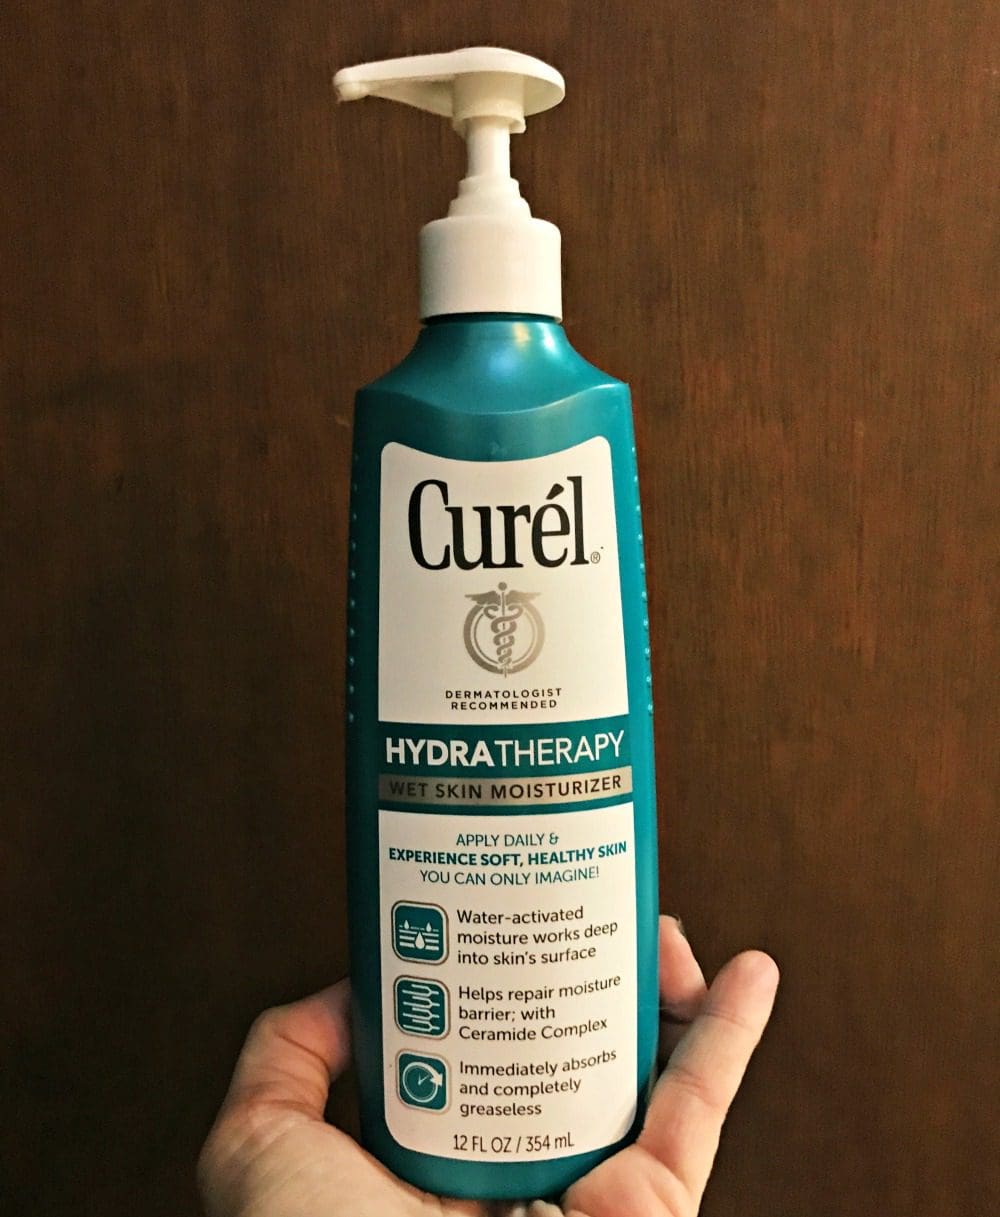 End Dry Skin with daily use of Curel Hydra Therapy Wet Skin Moisturizer